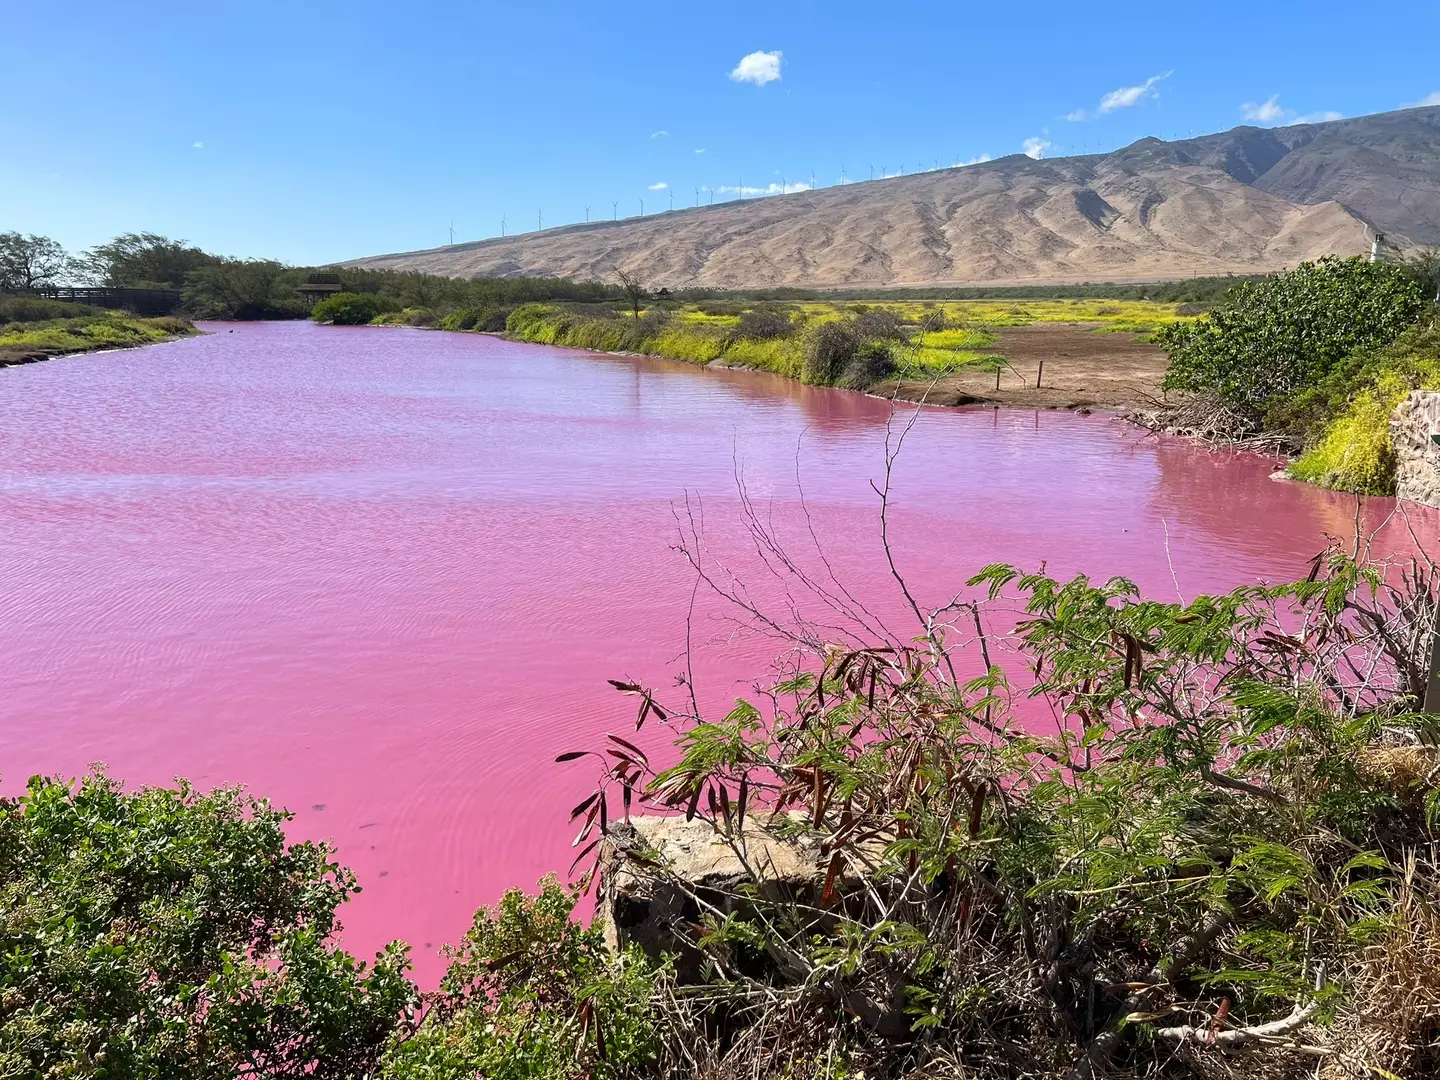 The pink pond is attracting a lot of eyeballs but not many swimmers as officials have declared it off limits.